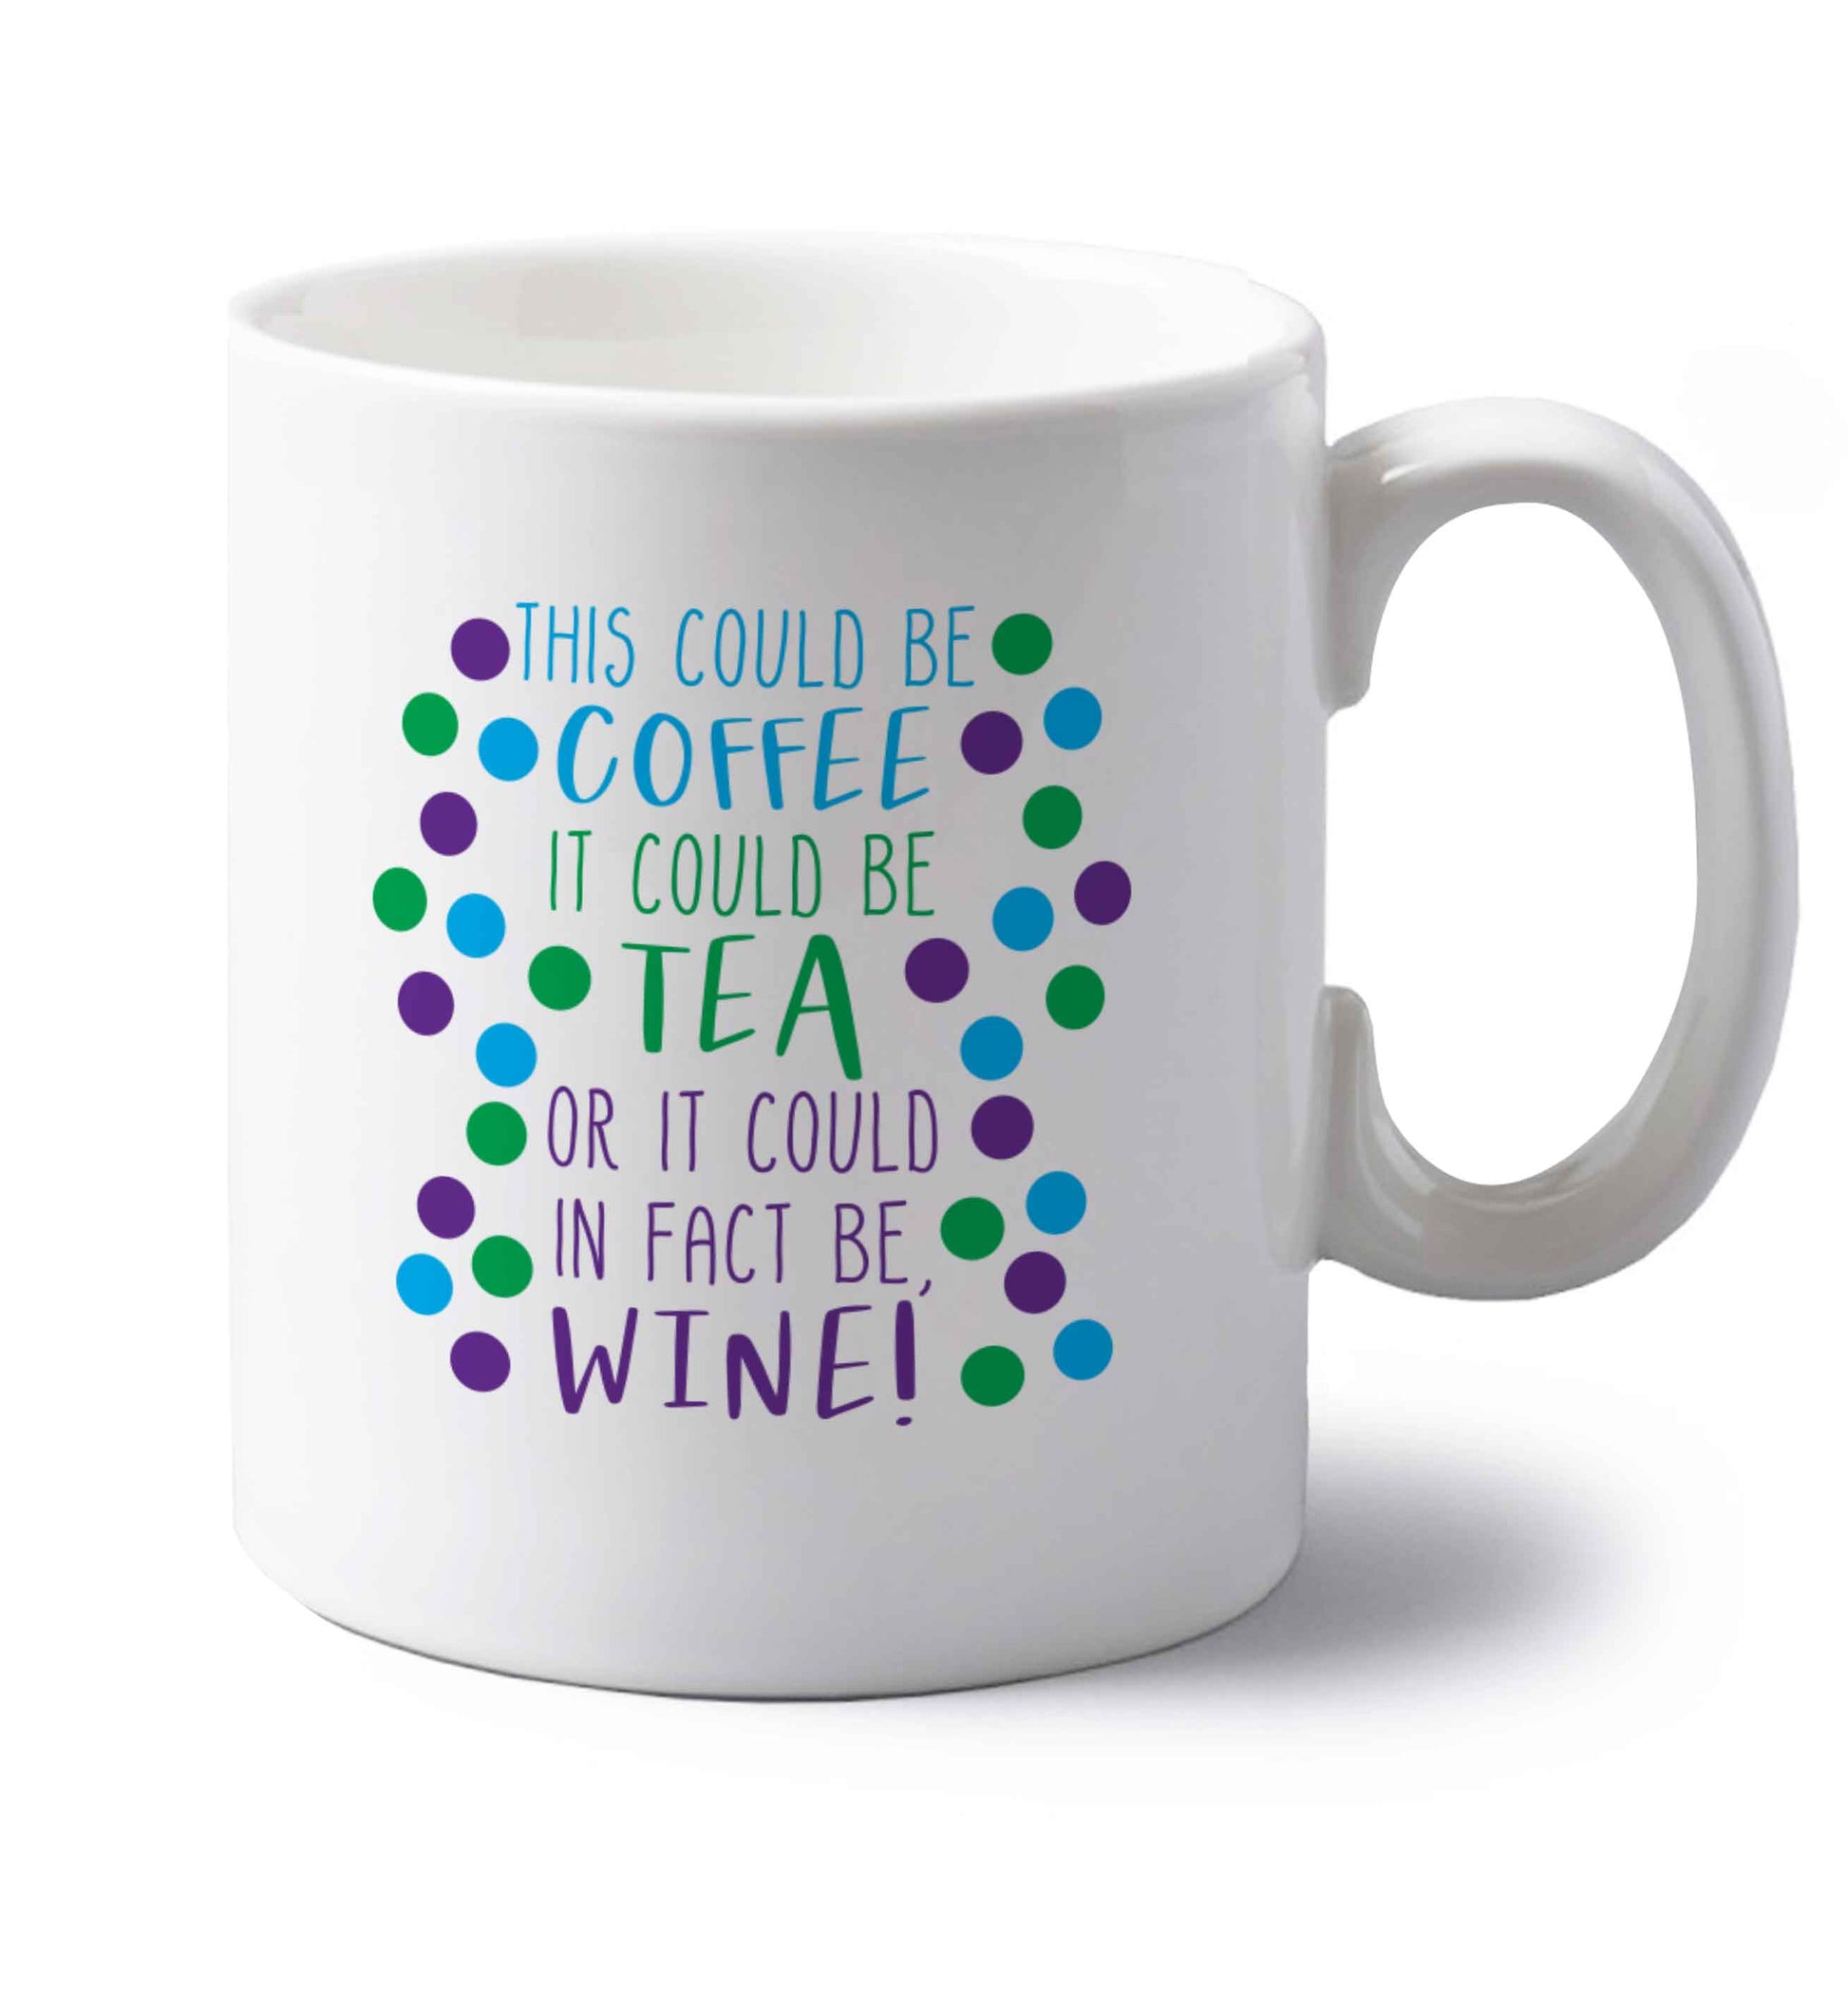 This could be tea, it could be coffee, or it could in fact be wine left handed white ceramic mug 